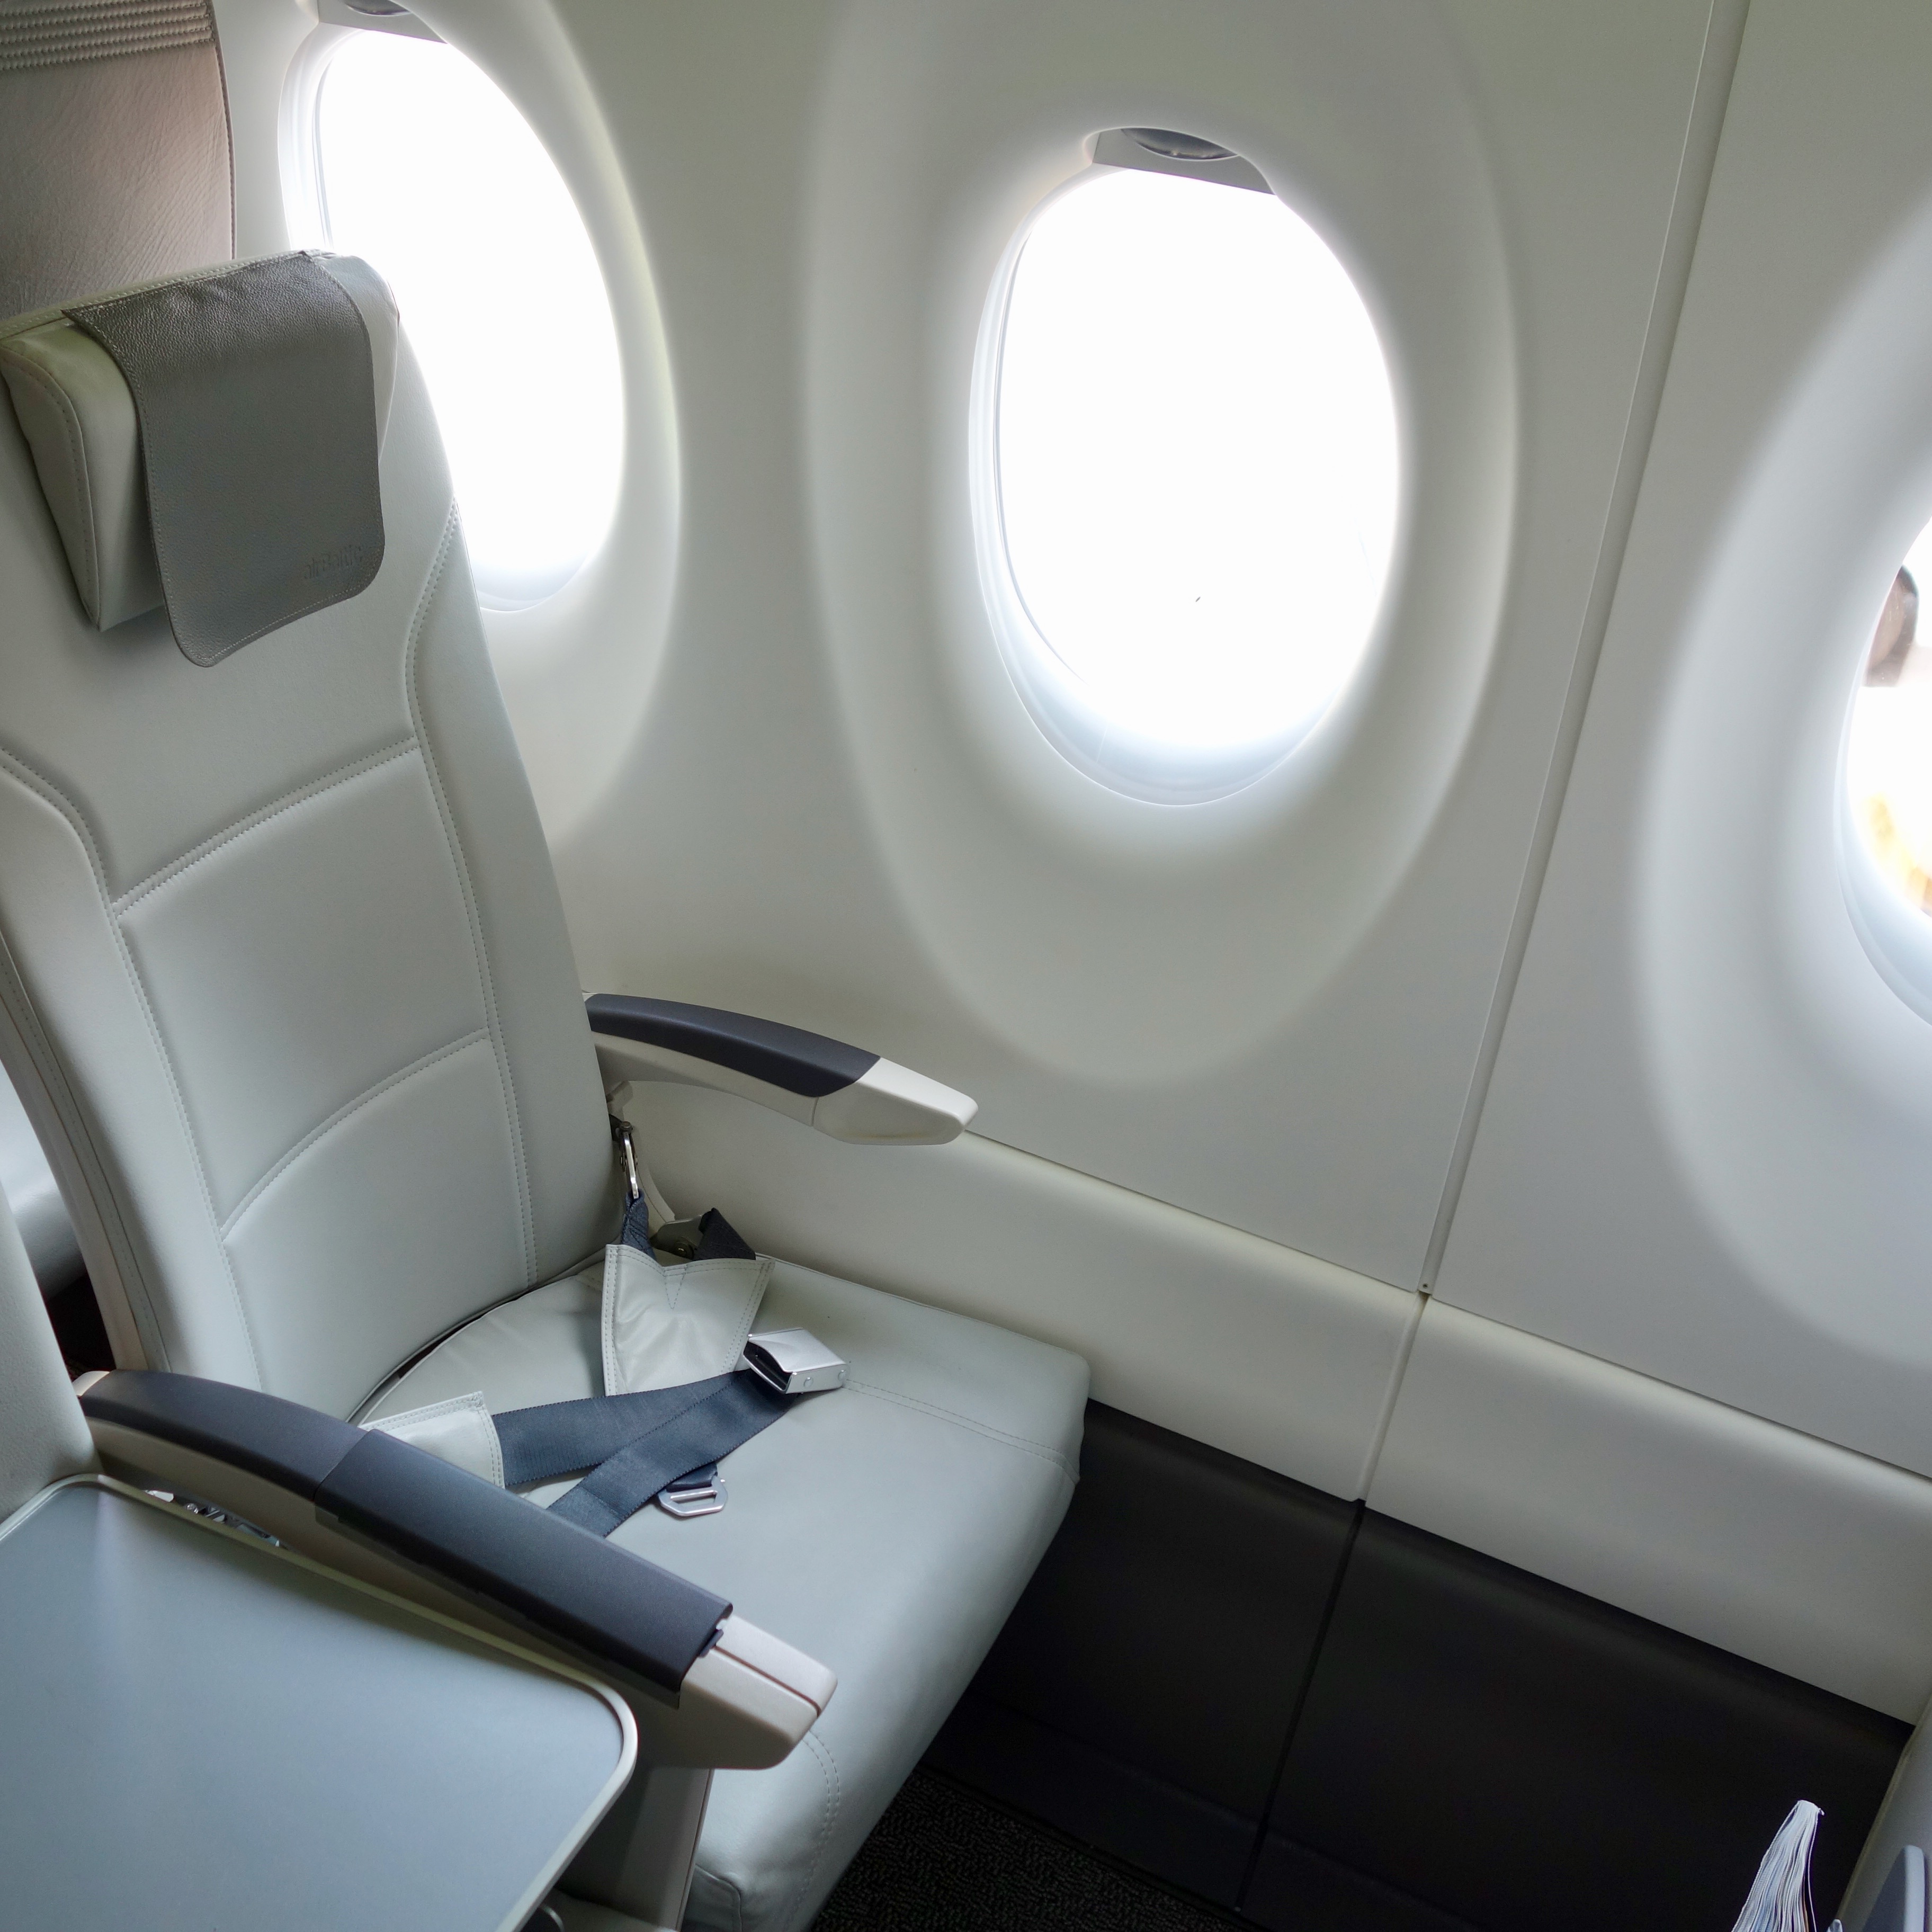 First Class section of the airBaltic Airbus A220 shows regular coach seats with a blocked seat next to it to allow for more space.  the seat is made from leather and the large windows allow in abundant light. 